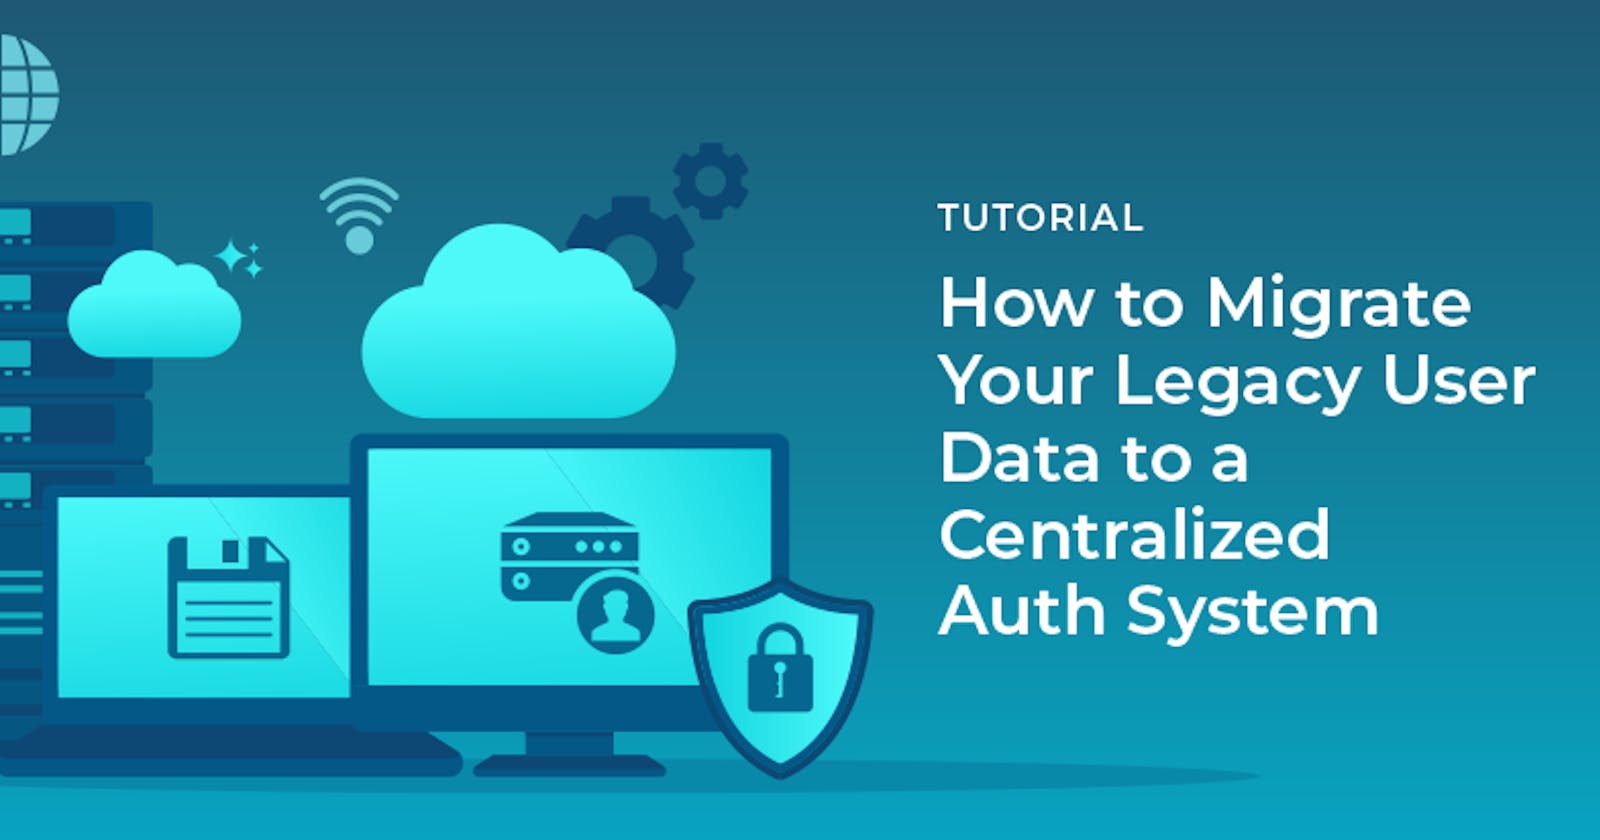 How to migrate your legacy user data to a centralized auth system